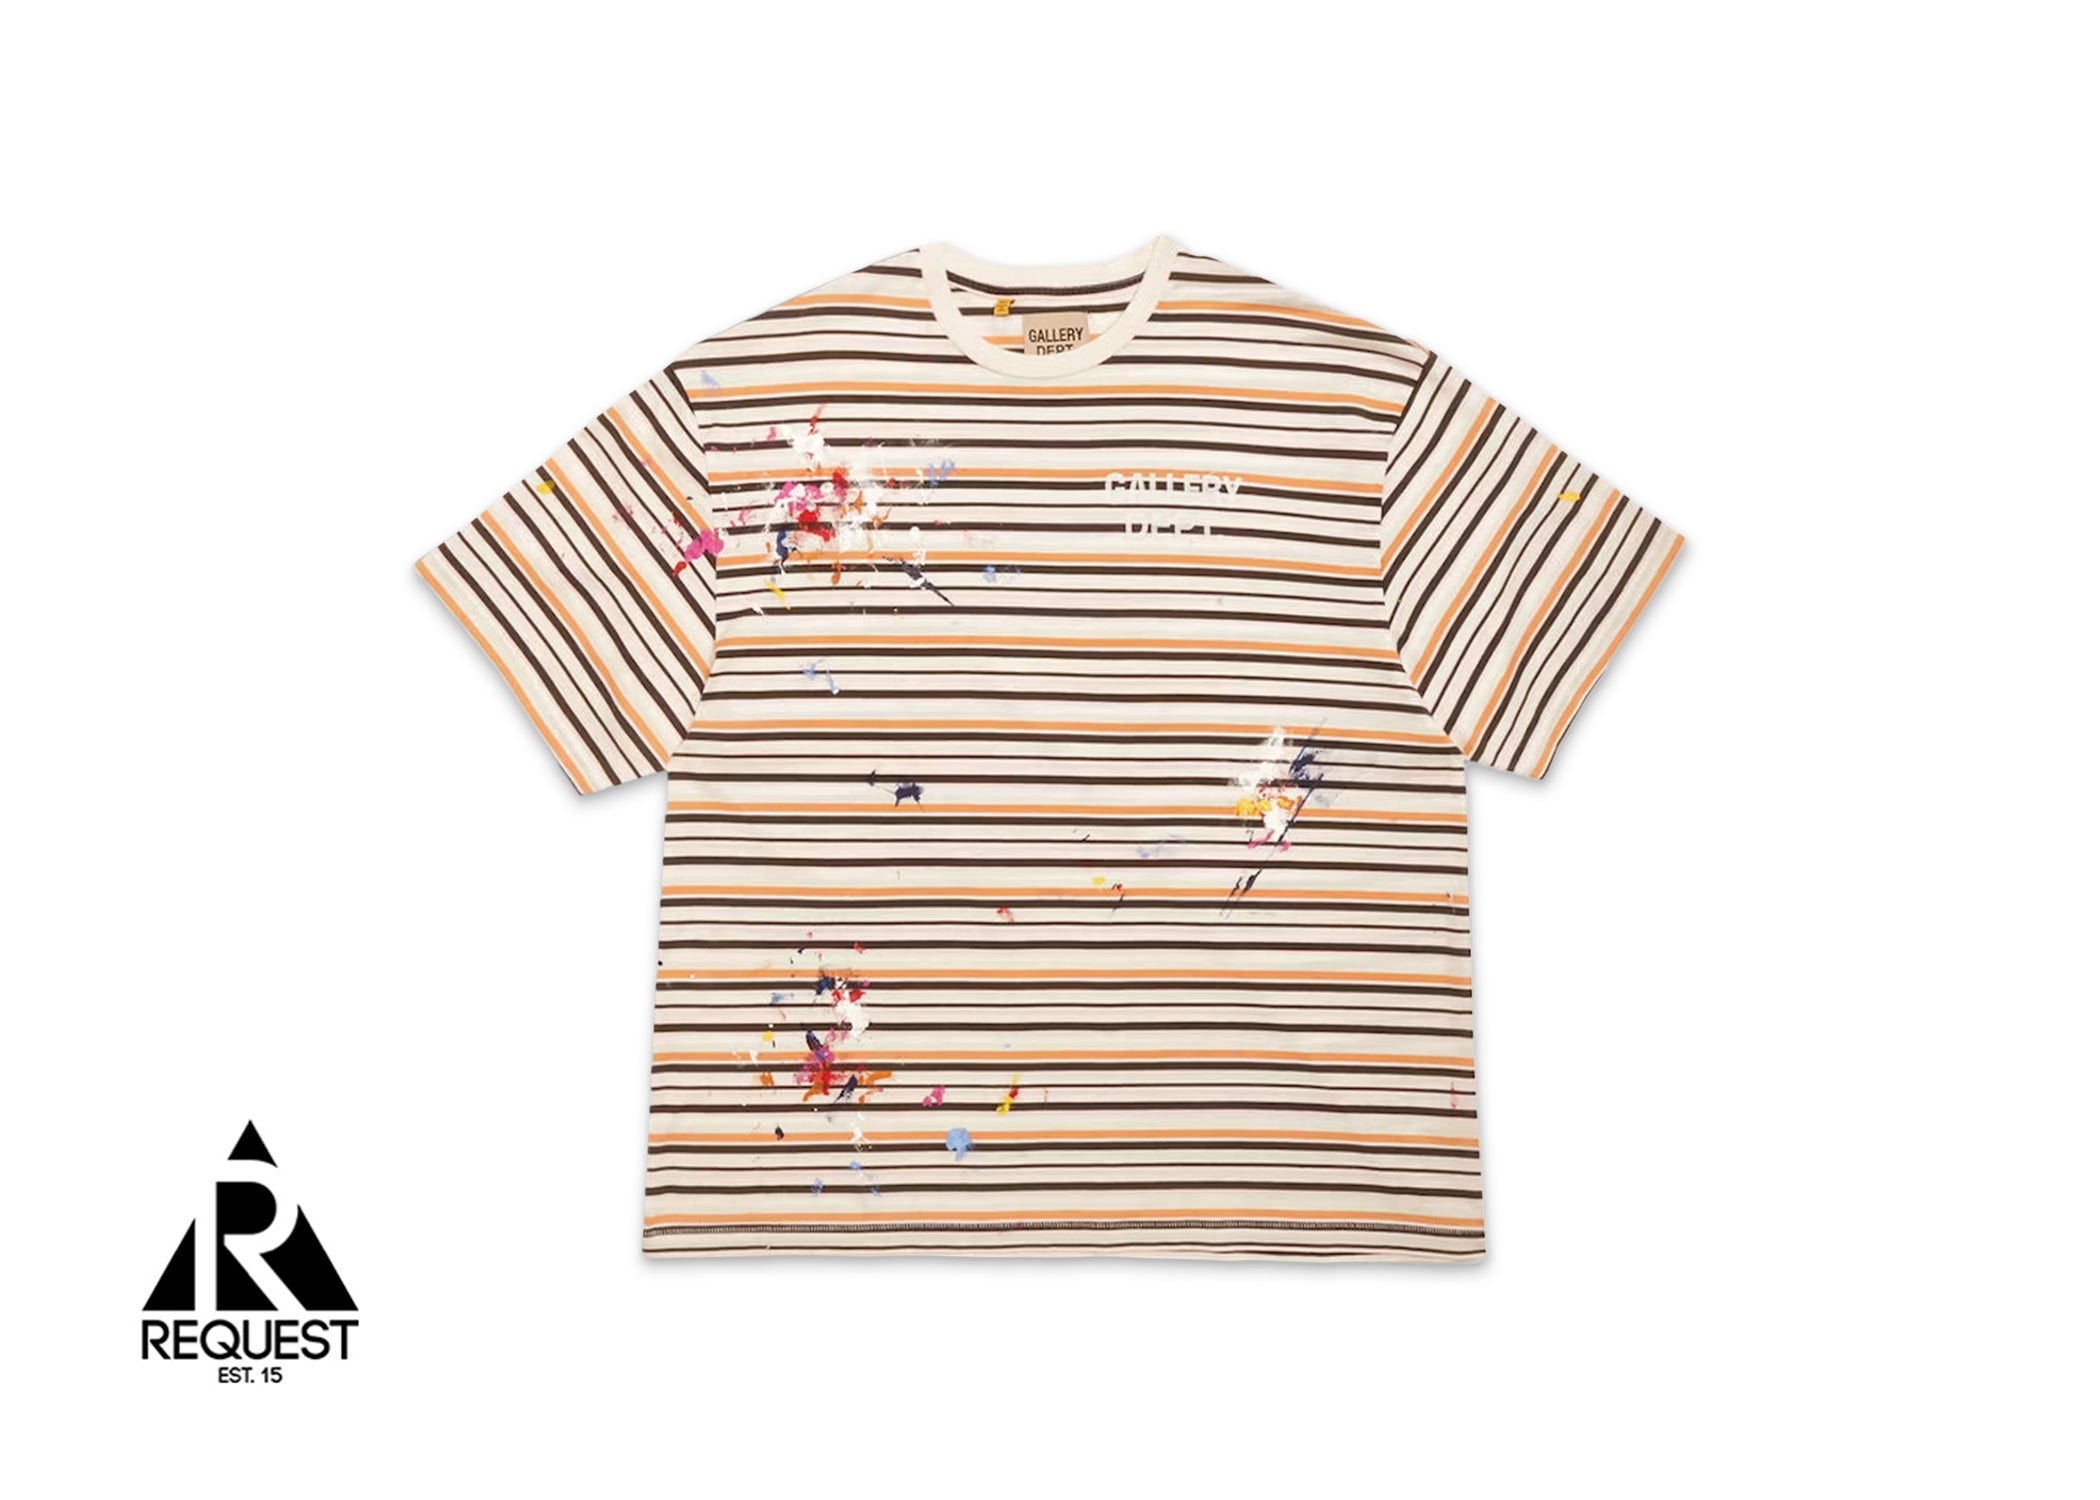 Gallery Dept. Nelson Striped Tee